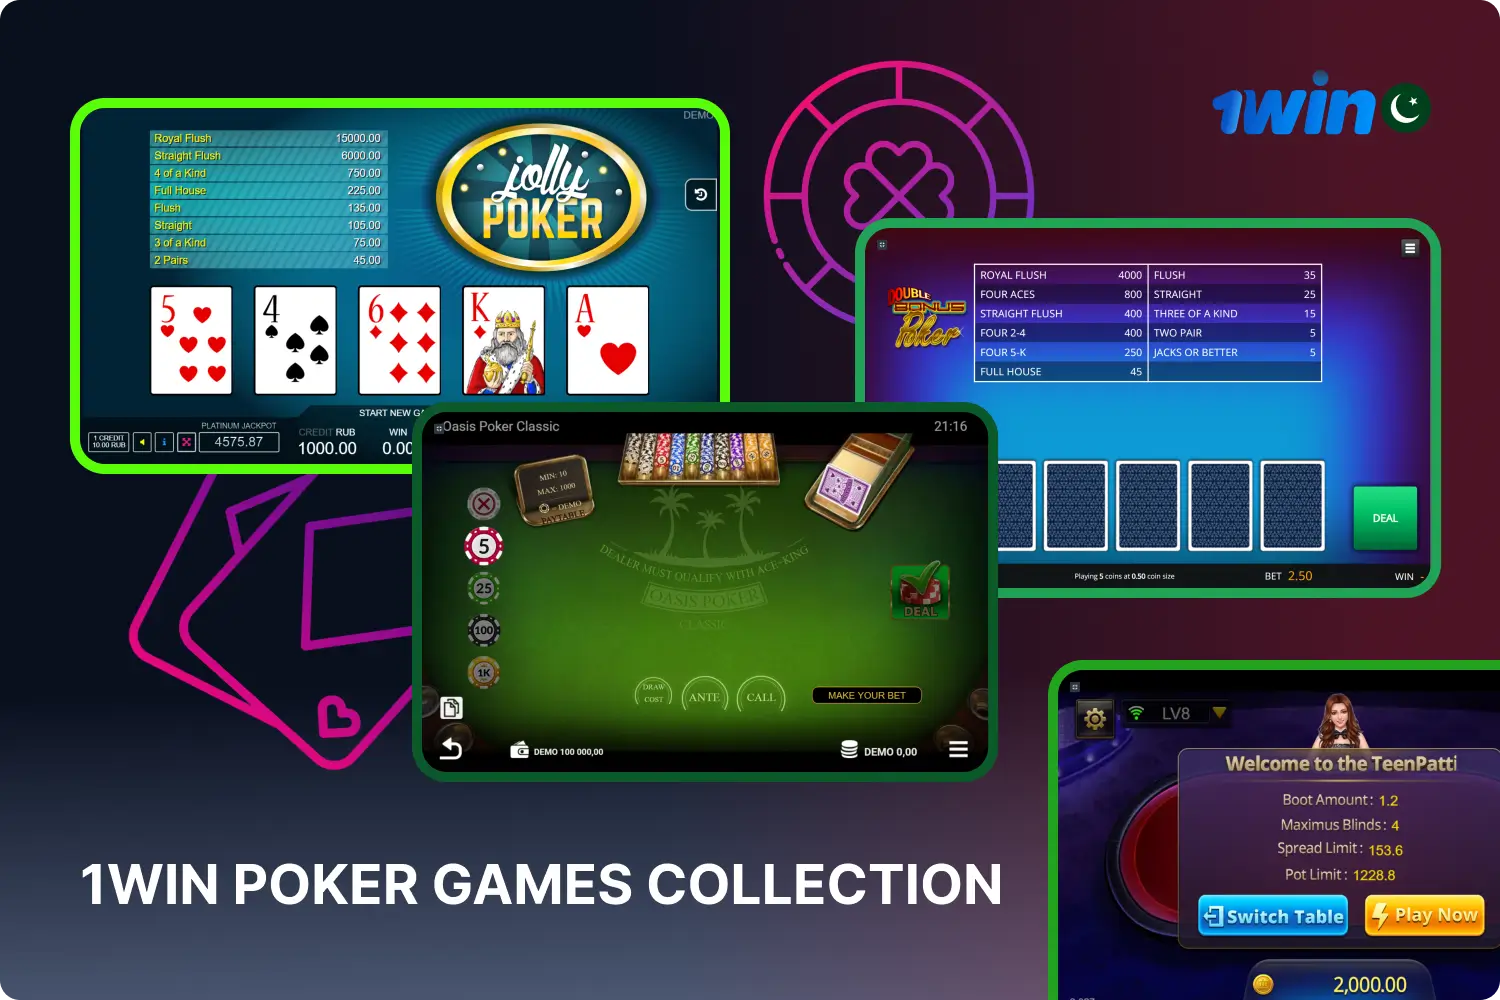 1win has a large collection of live and video poker games that is available to users from Pakistan